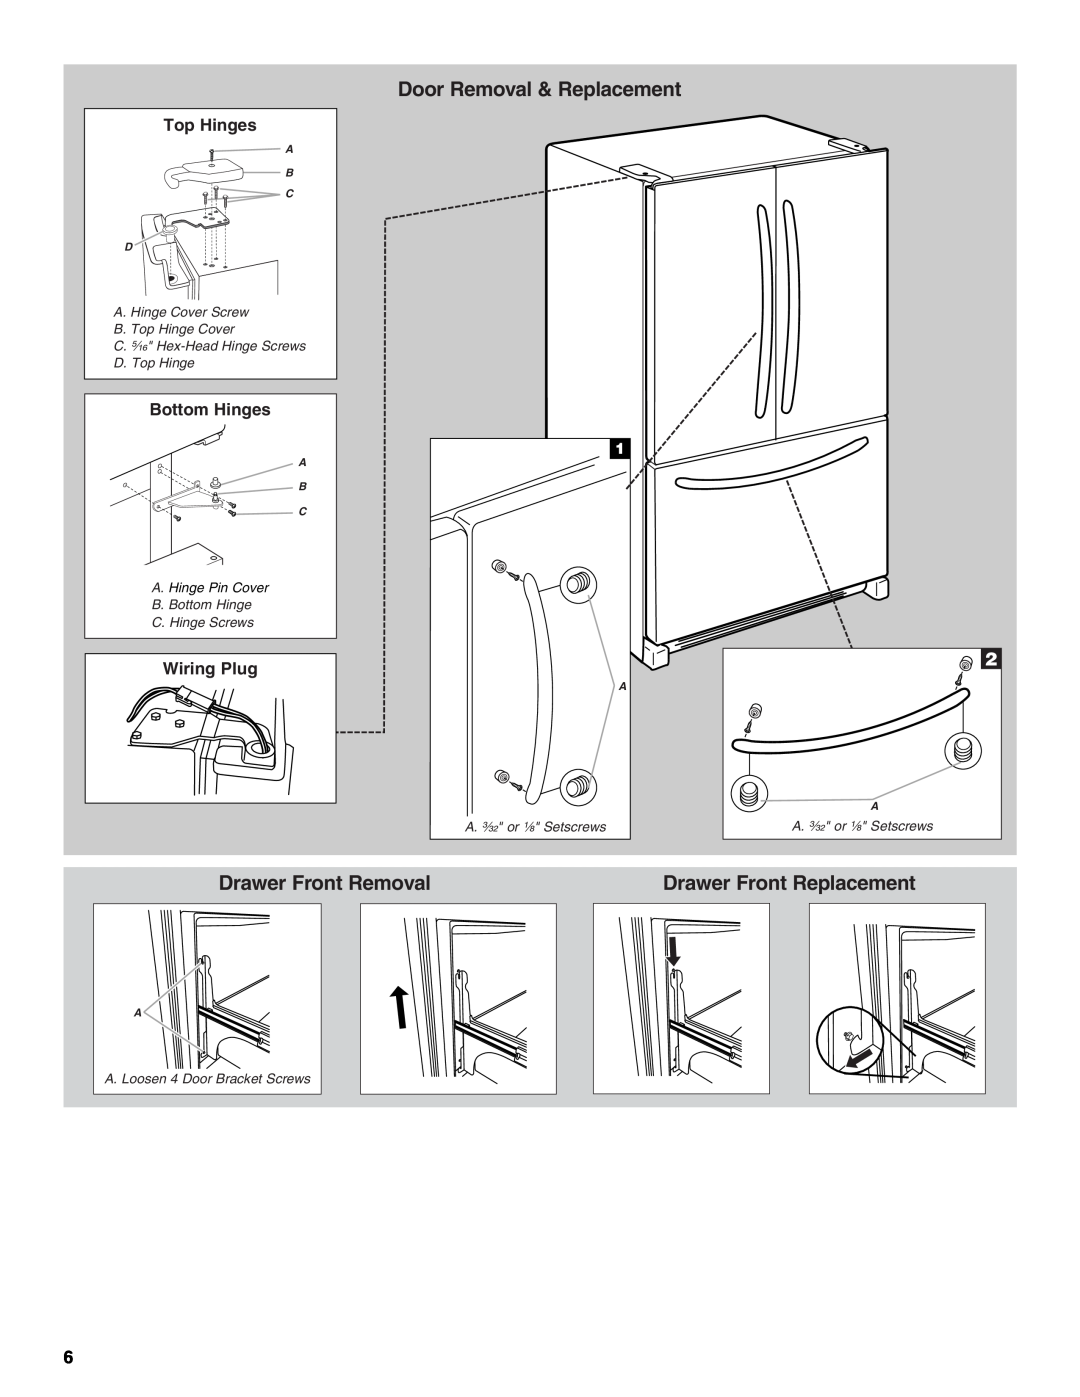 Jenn-Air W10276070A Door Removal & Replacement, Drawer Front Removal, Drawer Front Replacement, Top Hinges, Bottom Hinges 